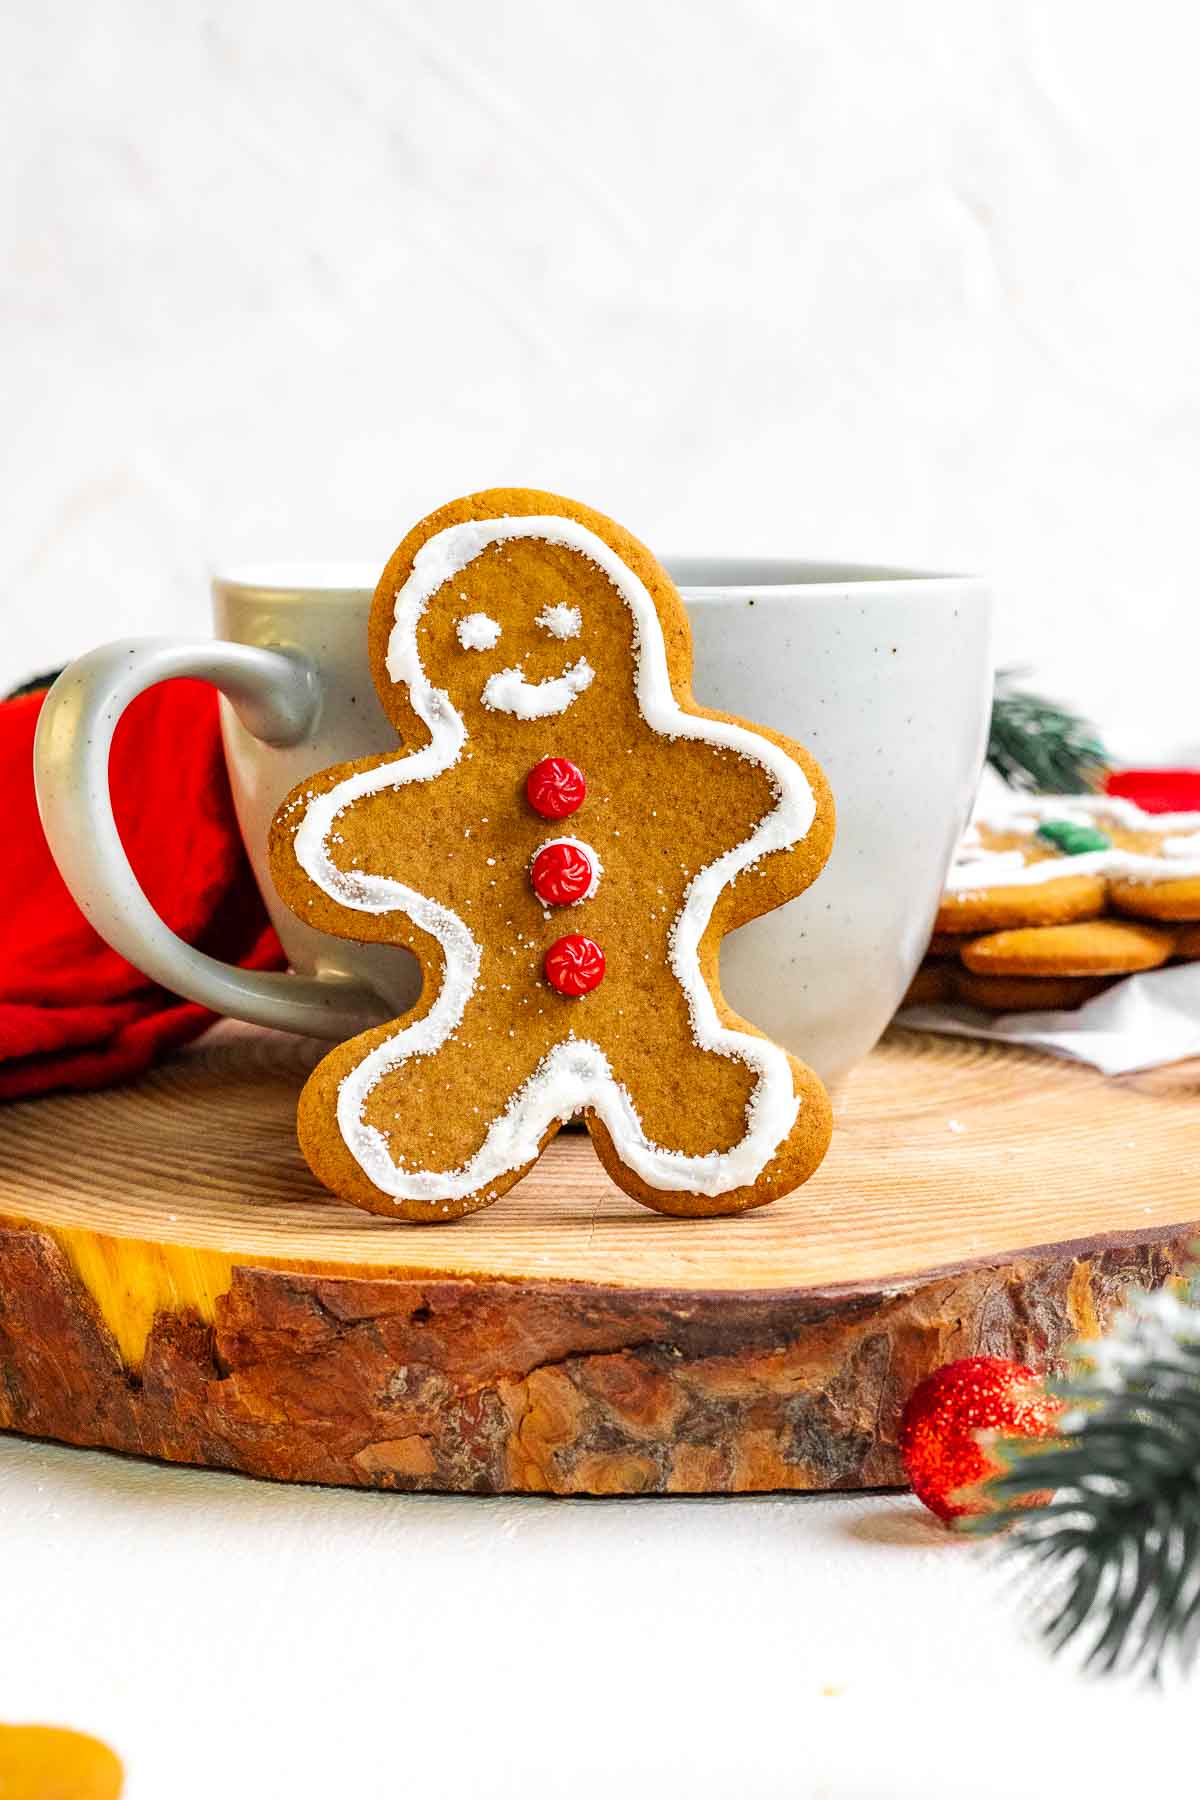 Gingerbread Man Cookie served with a mug of hot chocolate on a wooden tray.